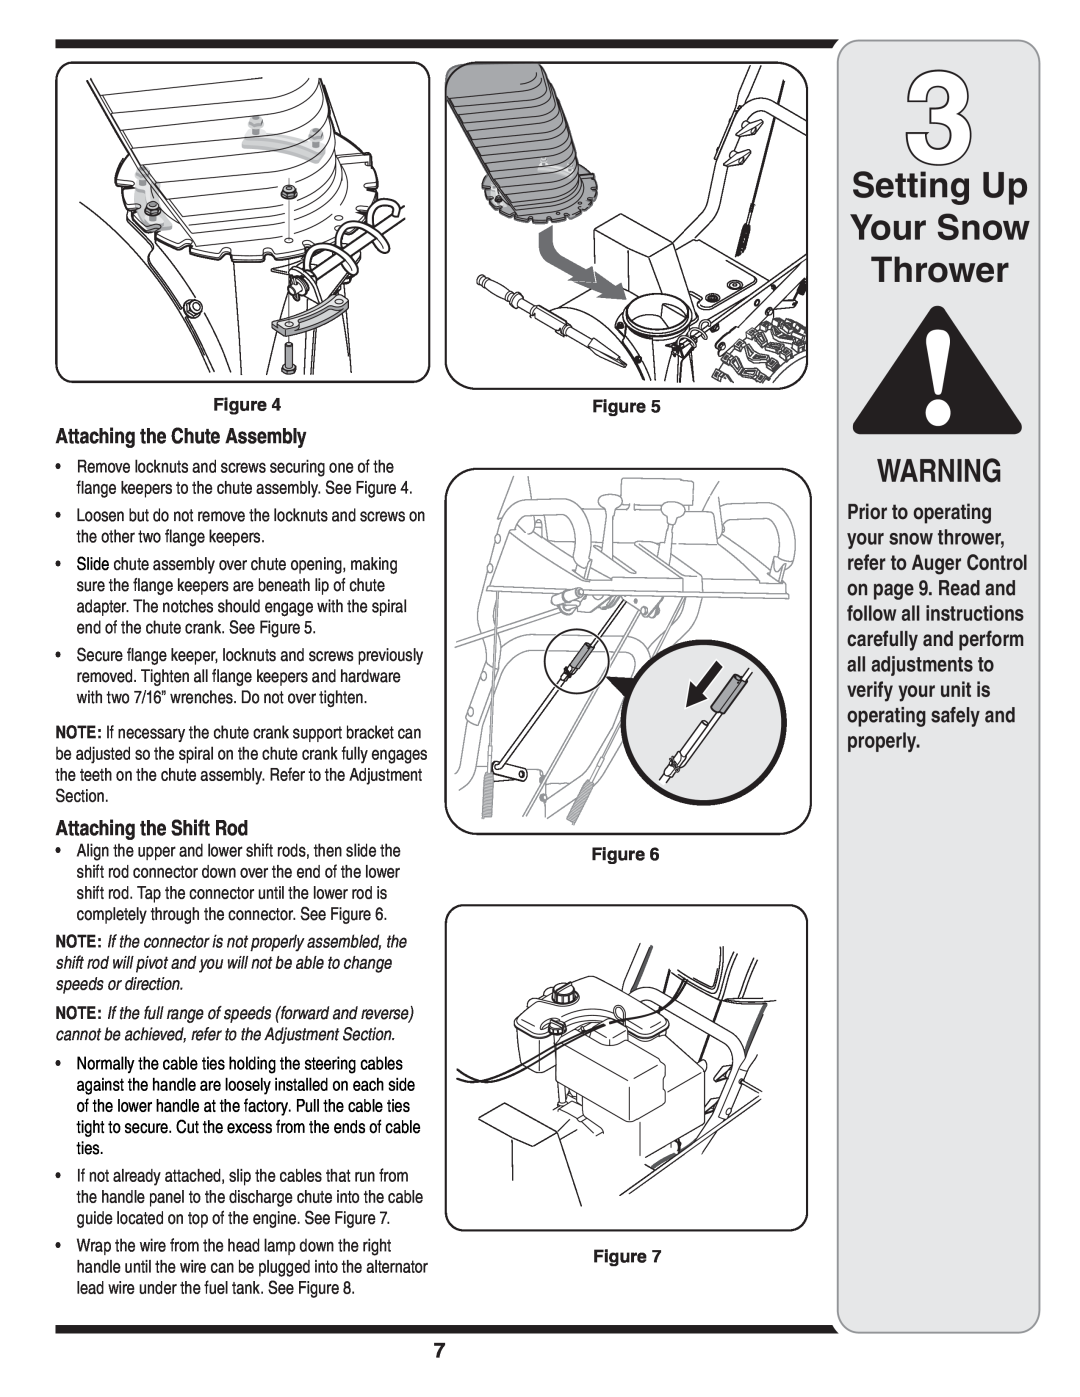 MTD 769-03342 warranty Setting Up Your Snow Thrower, Attaching the Chute Assembly, Attaching the Shift Rod 